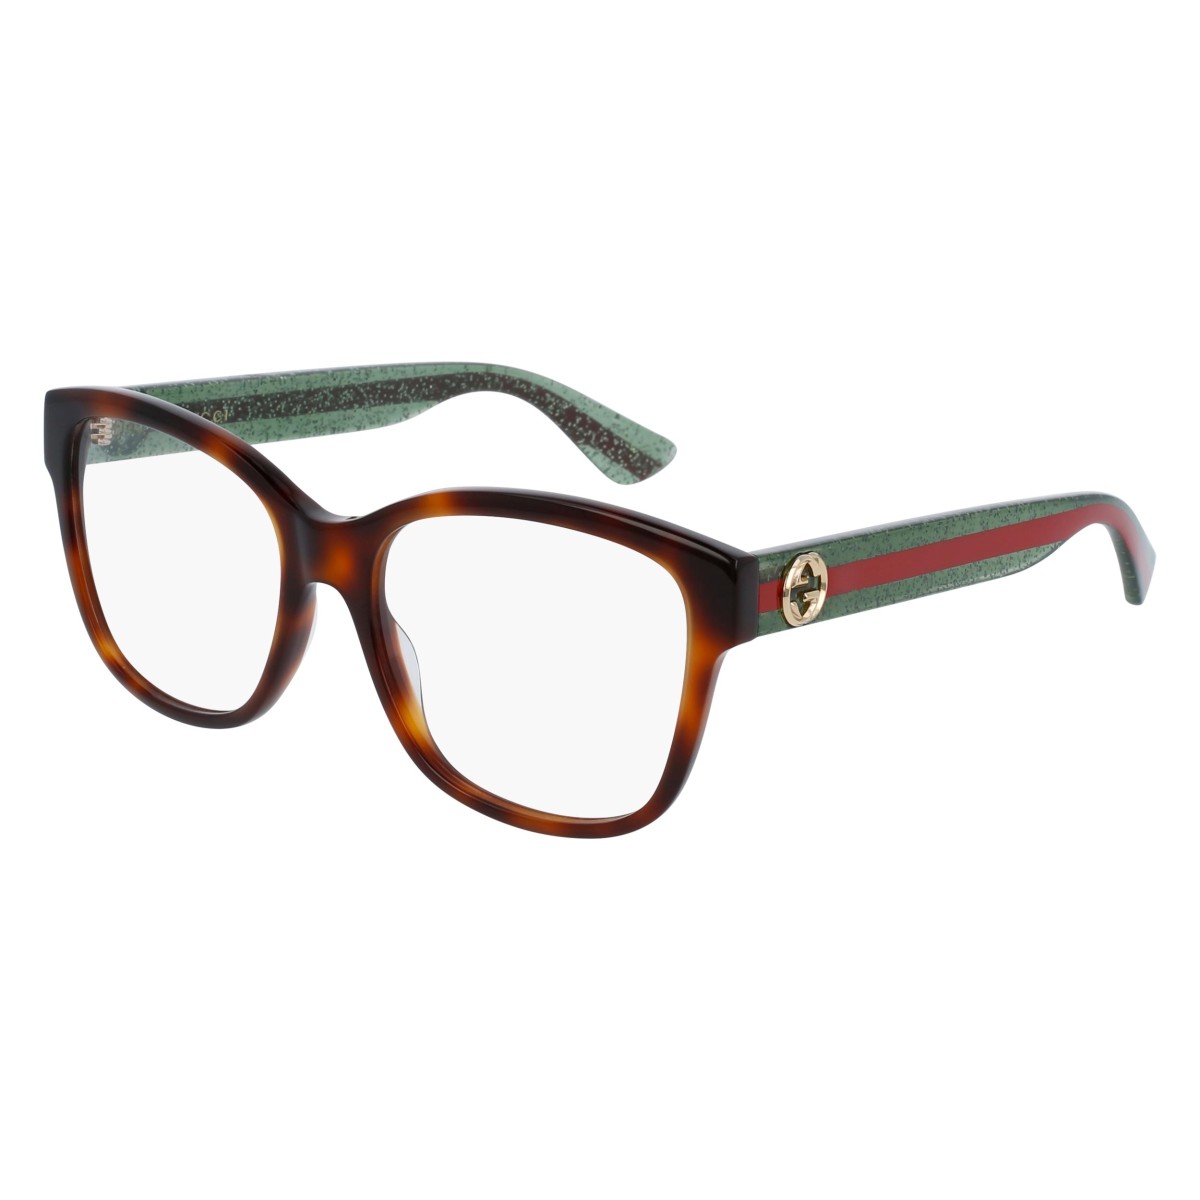 Gucci - GG0038ON 002 Tortoise/Red/Green